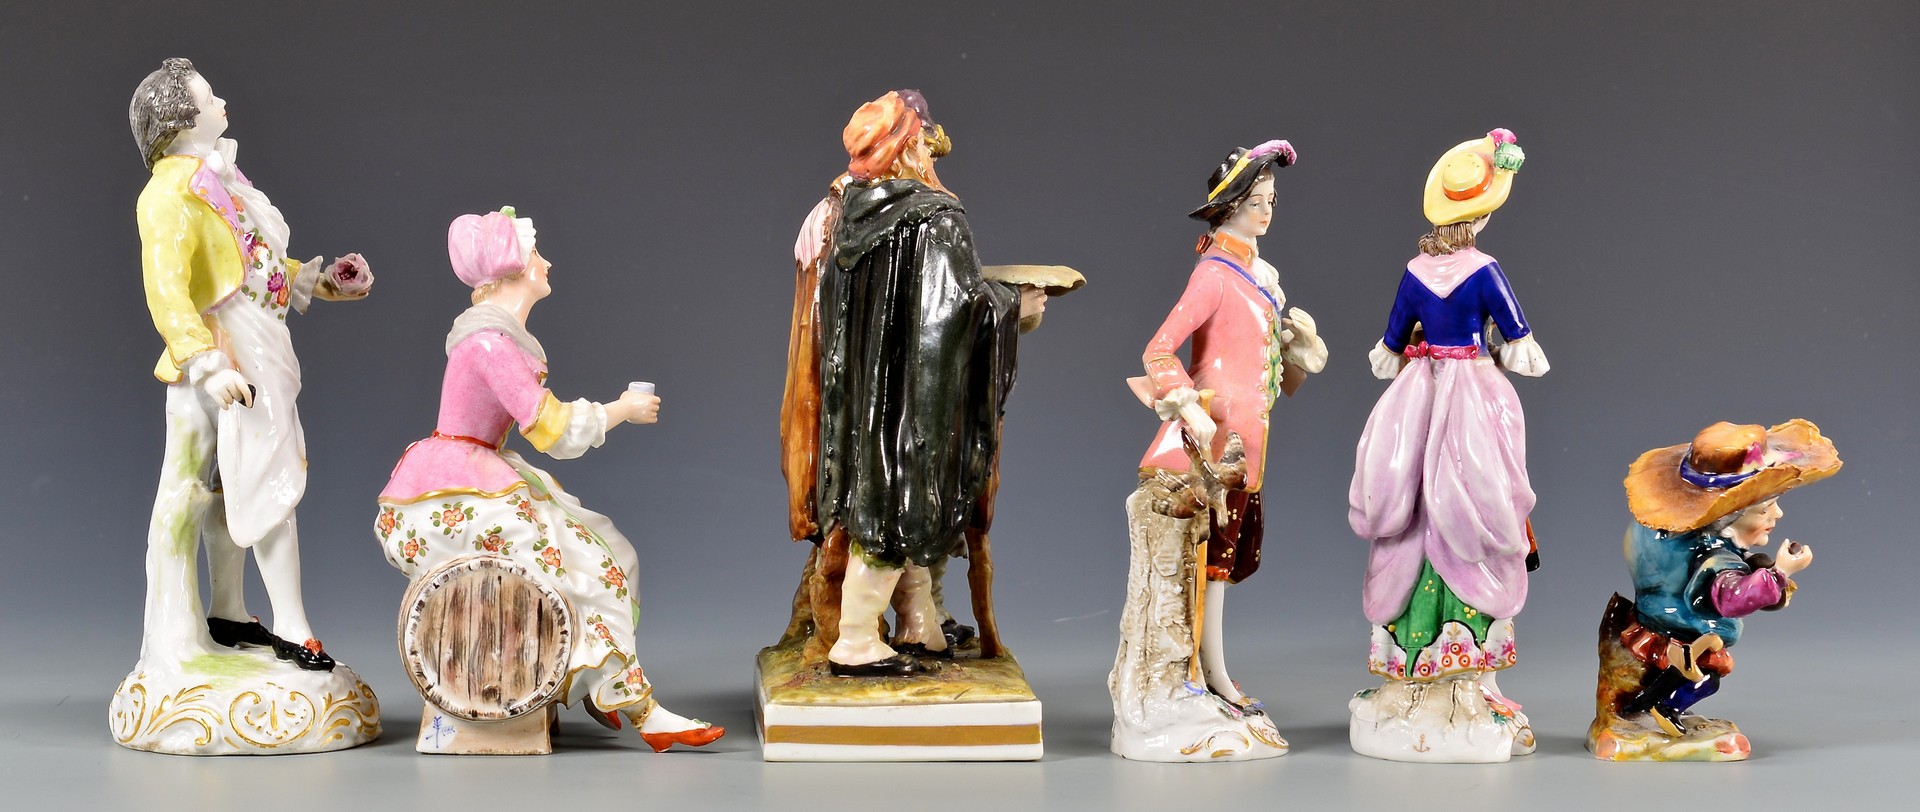 Lot 719: Group of Continental Porcelain Figures, 6 total